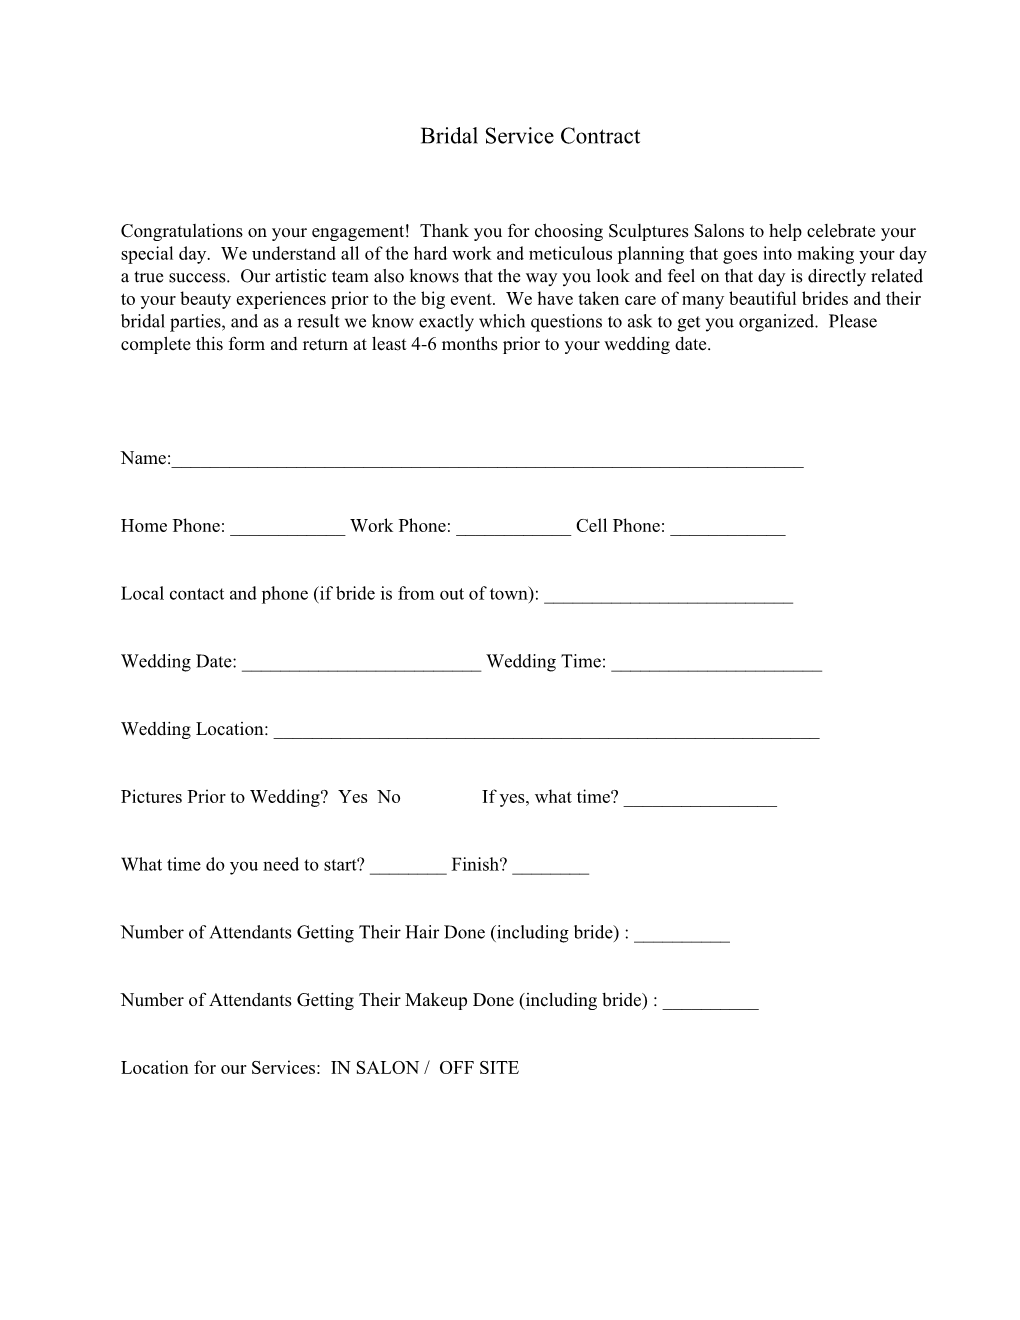 Bridal Package Contract